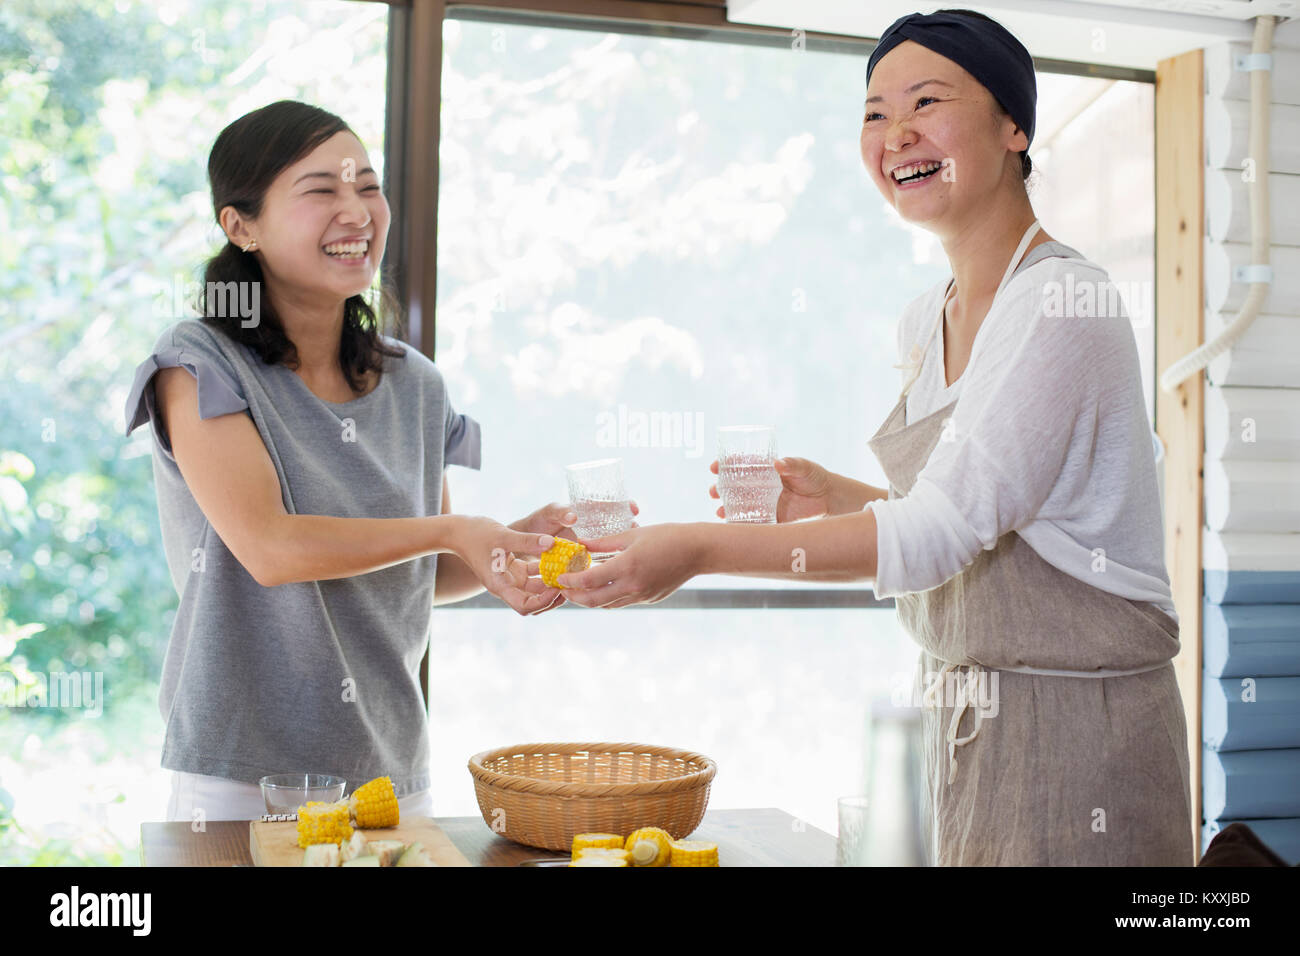 Two smiling women standing indoors at a table, holding drinking glasses. Stock Photo